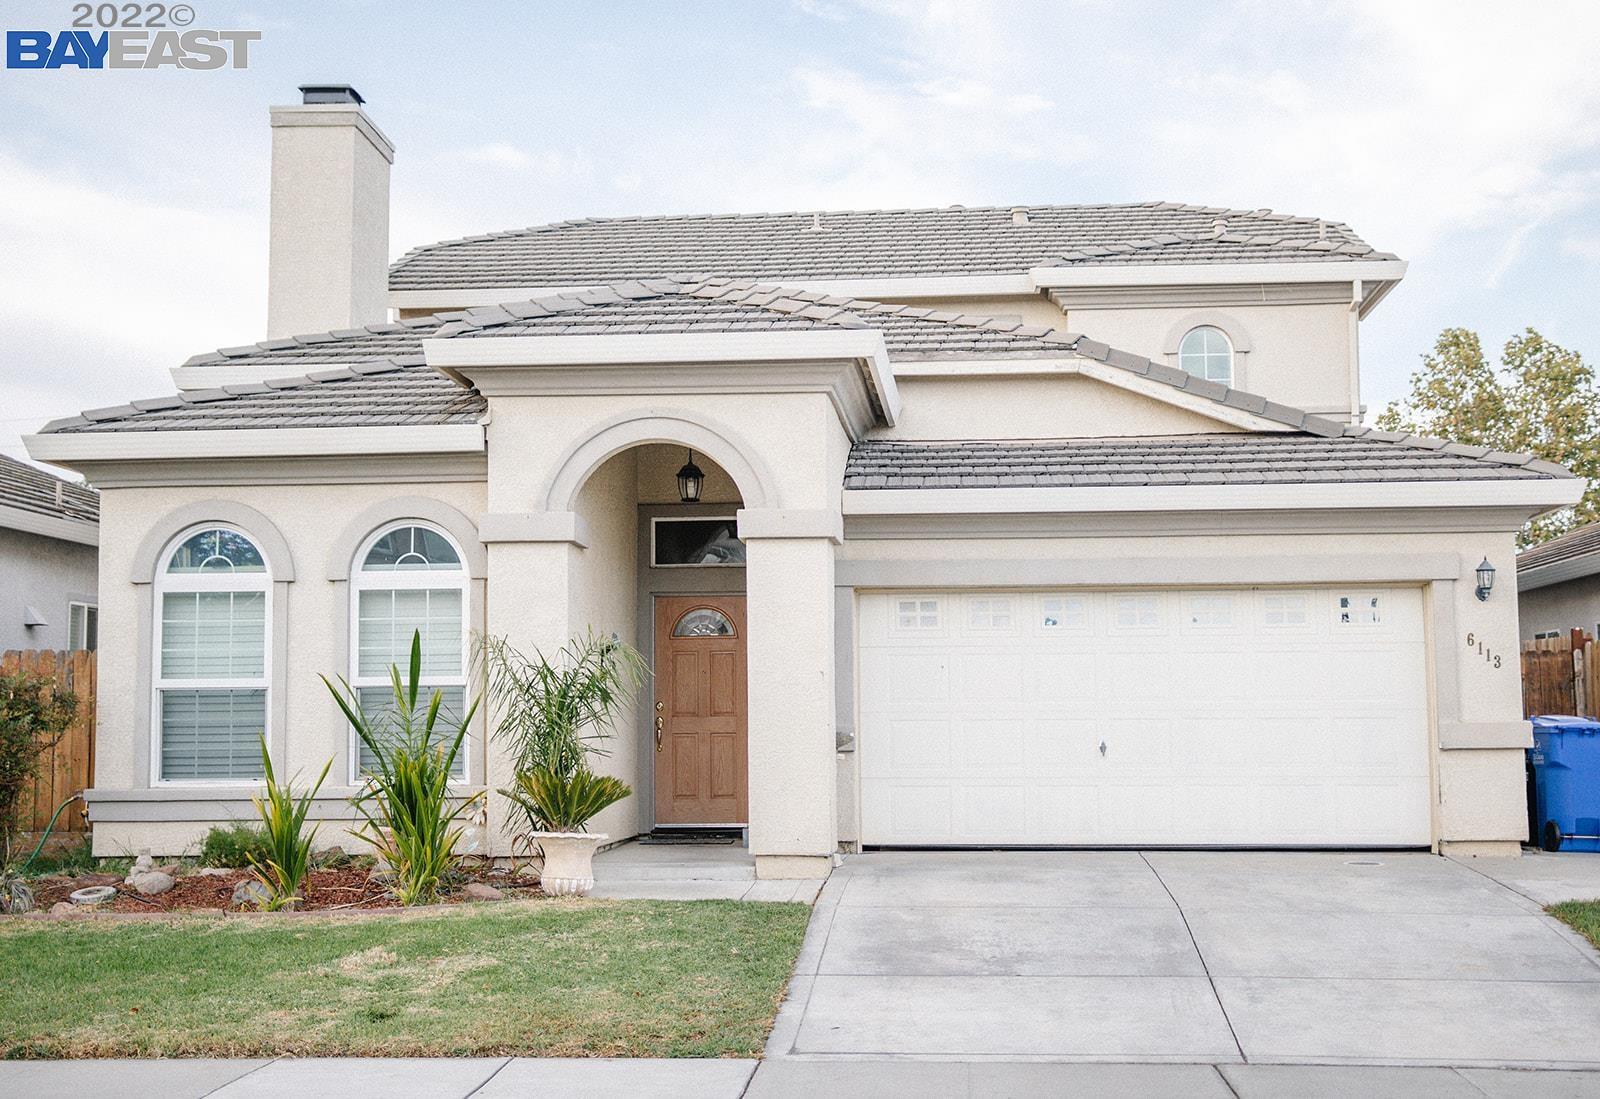 6113 Orchard Hill Way , 41013463, Elk Grove, Single-Family Home,  for sale, REALTY EXPERTS®